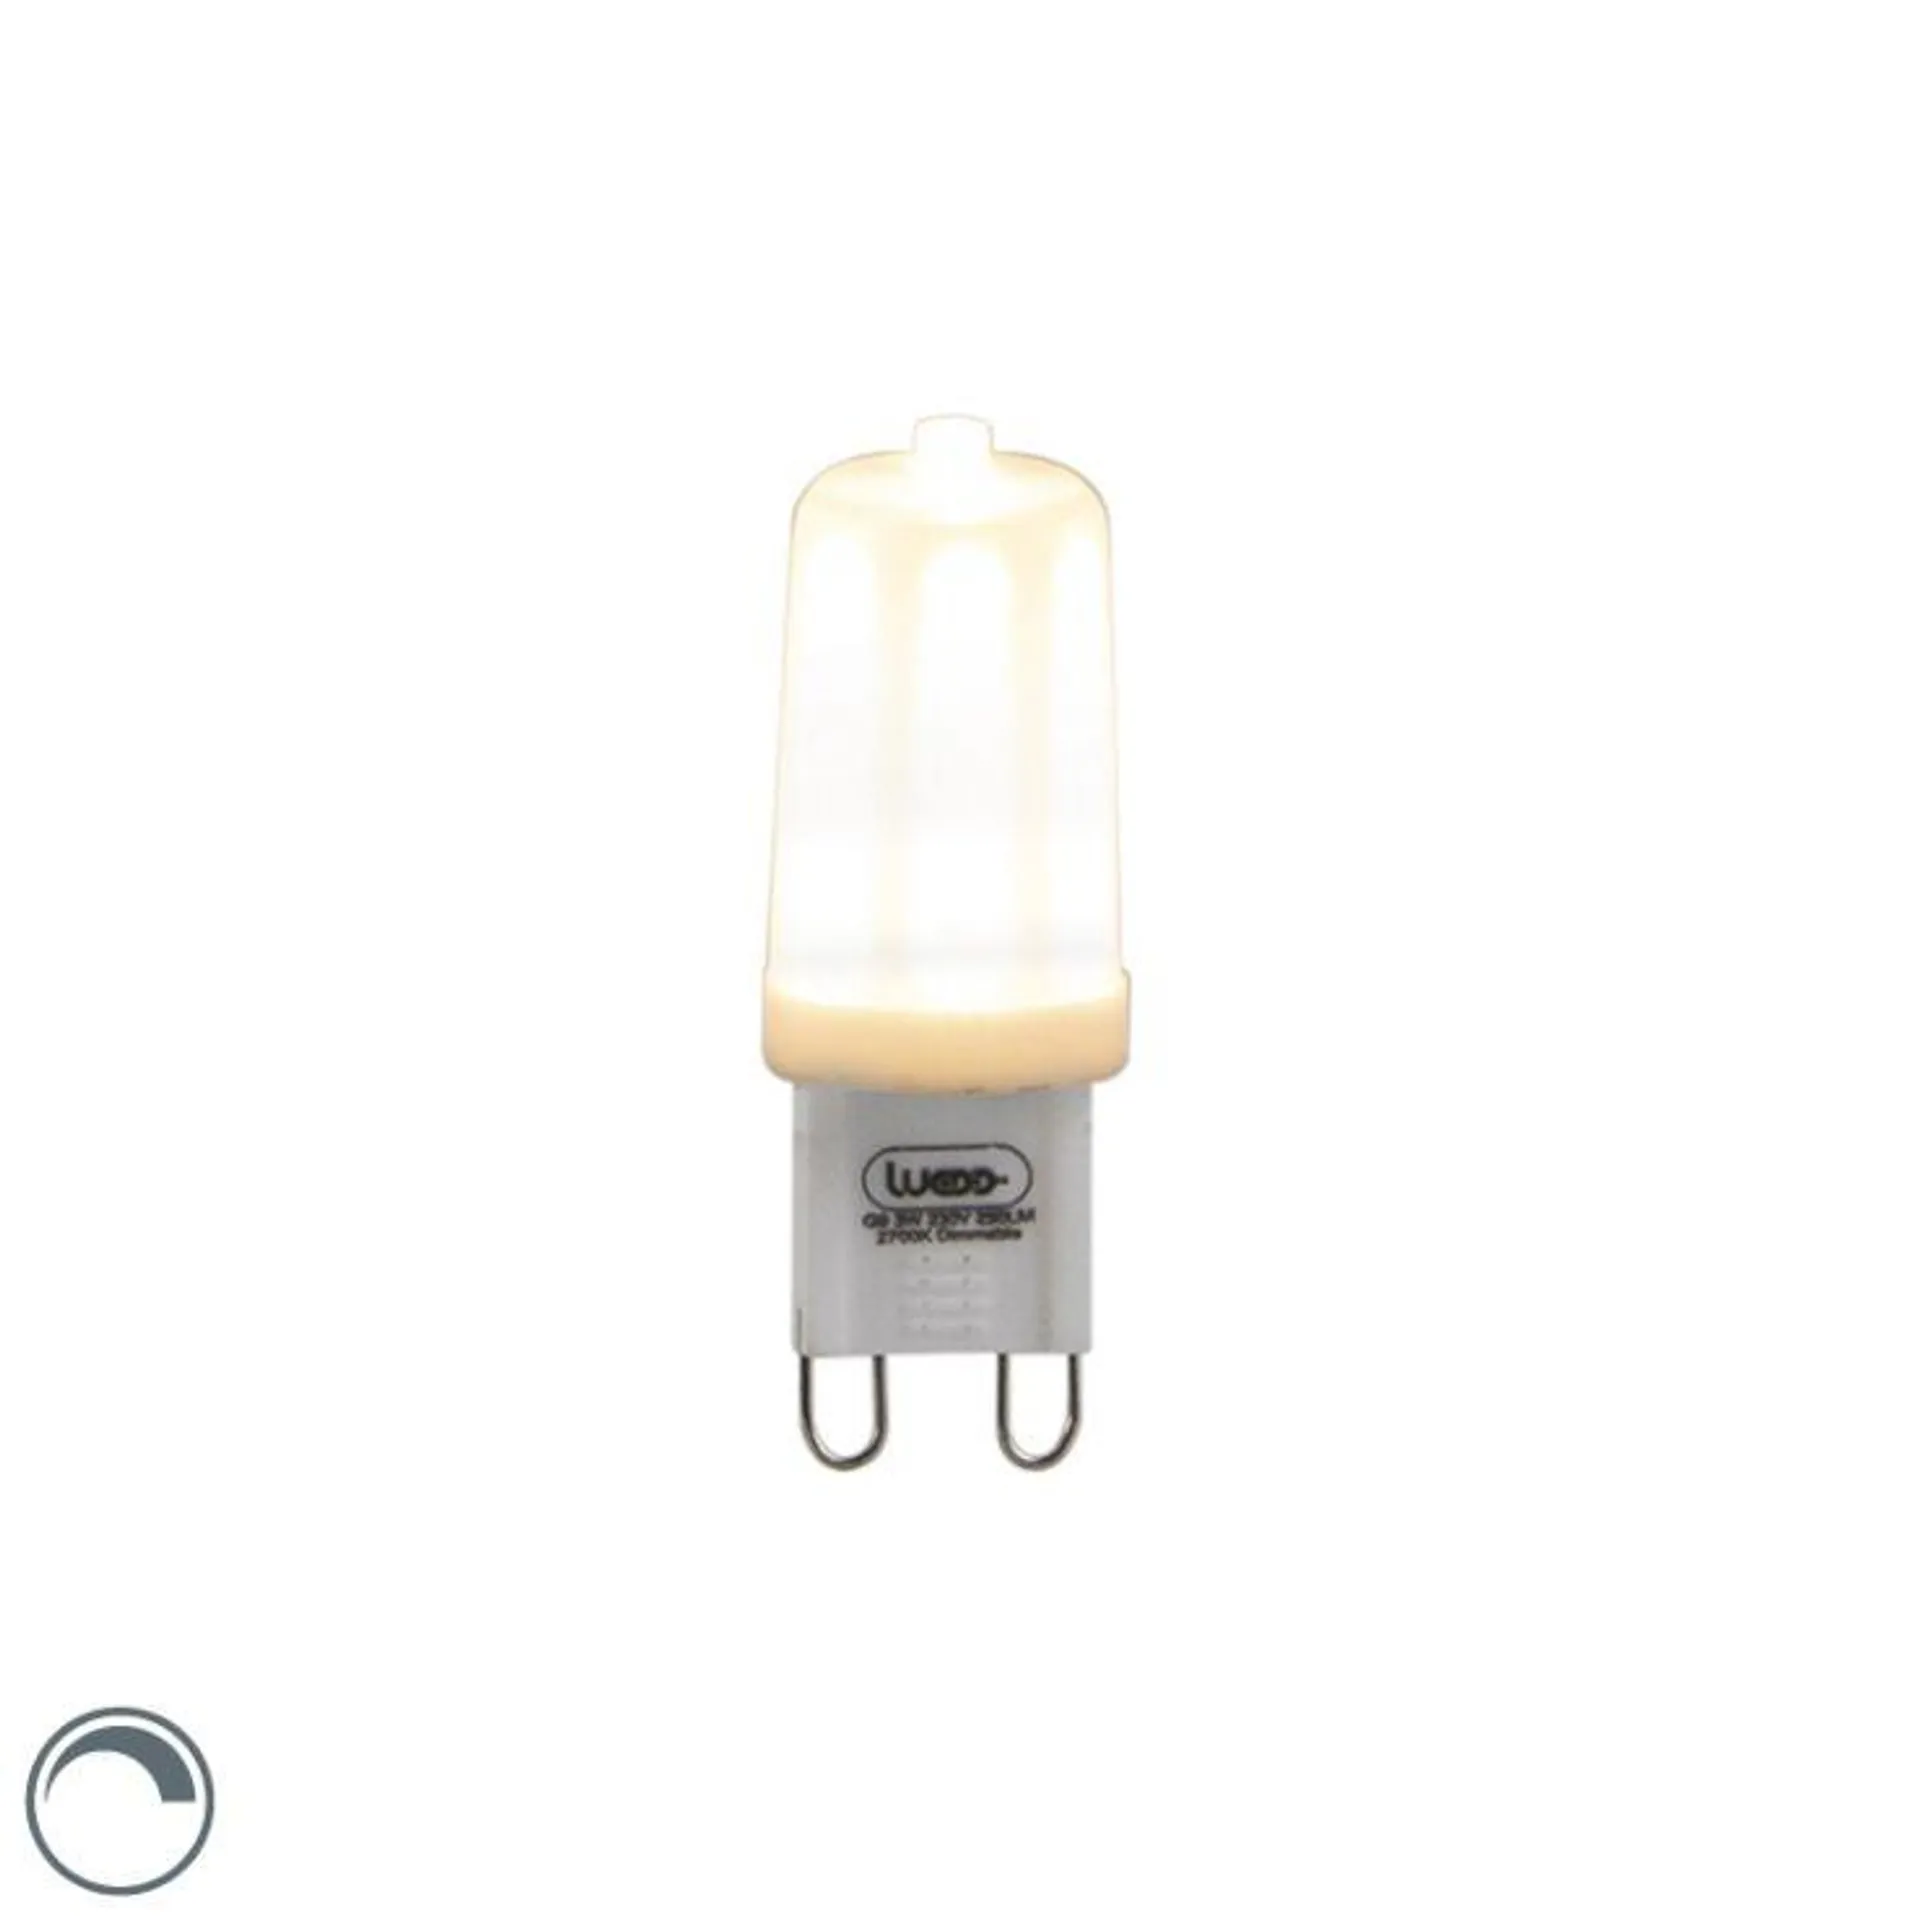 G9 dimbare LED lamp 3W 280 lm 2700K